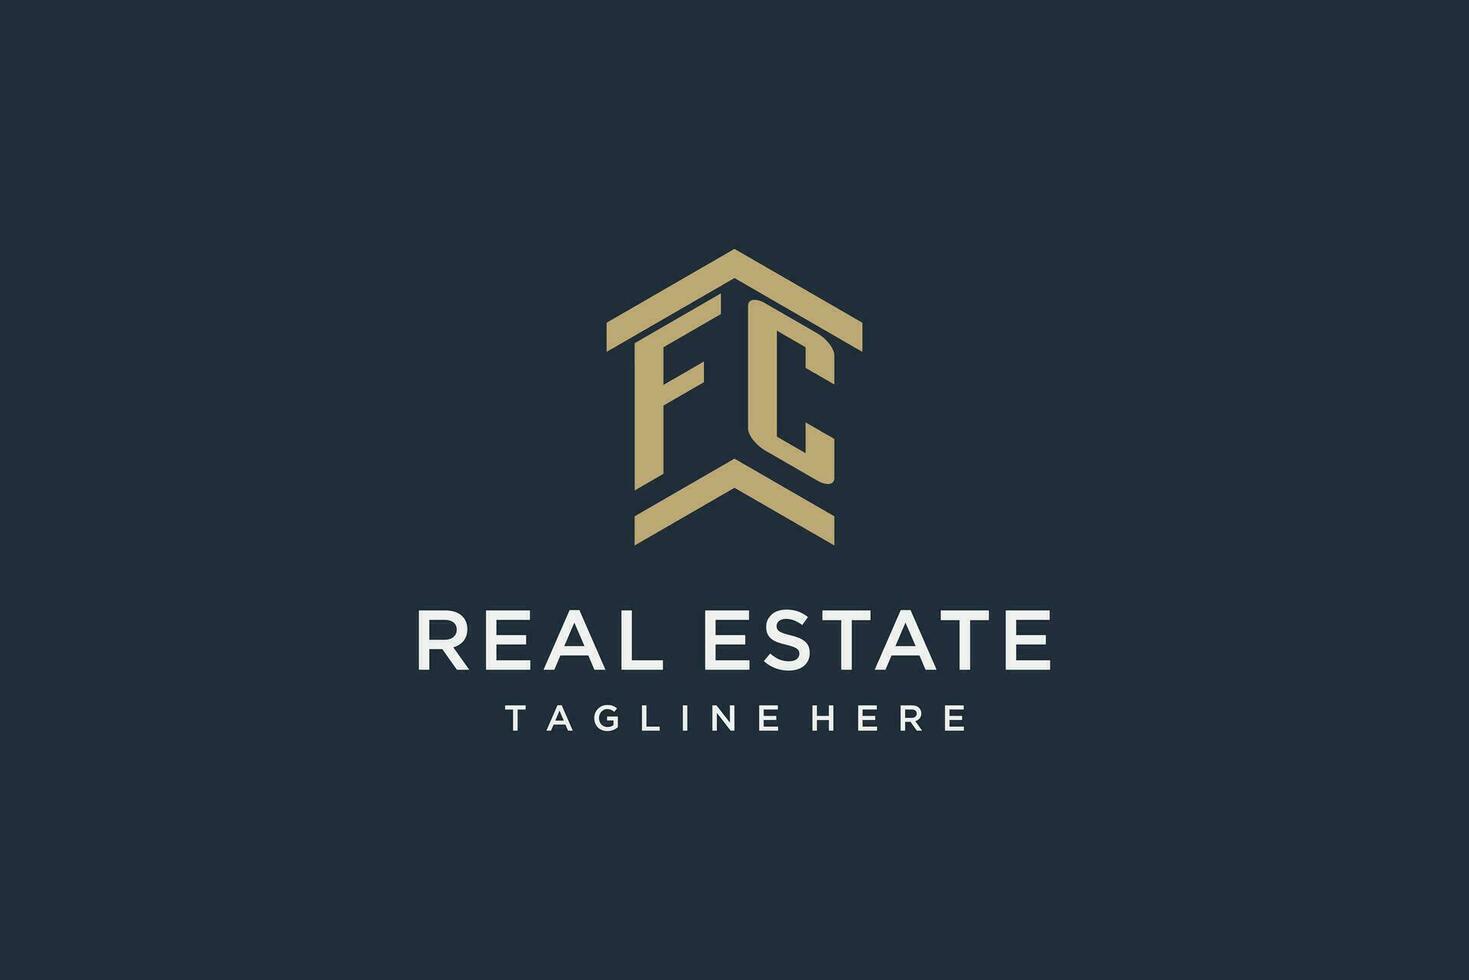 Initial FC logo for real estate with simple and creative house roof icon logo design ideas vector